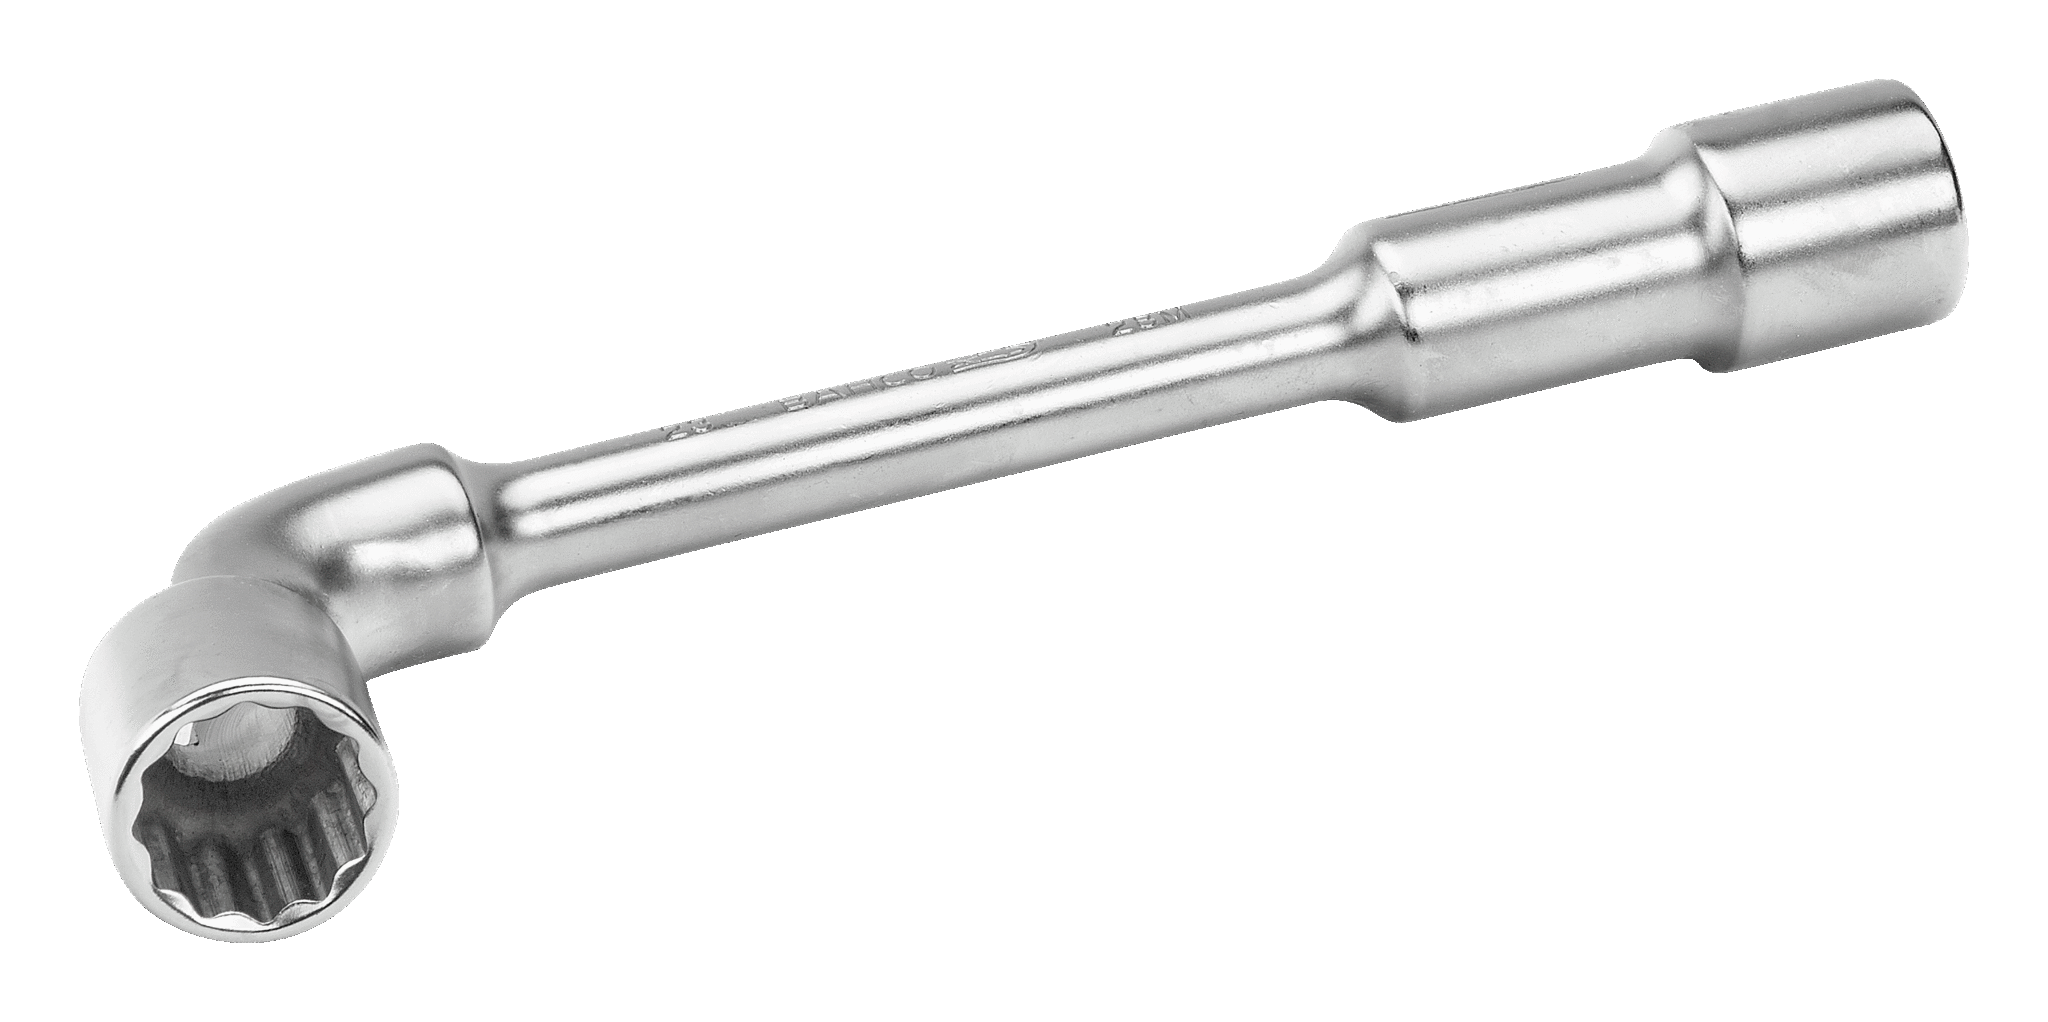 Metric Double Head Offset Socket Wrenches with 12 x 6-Point 